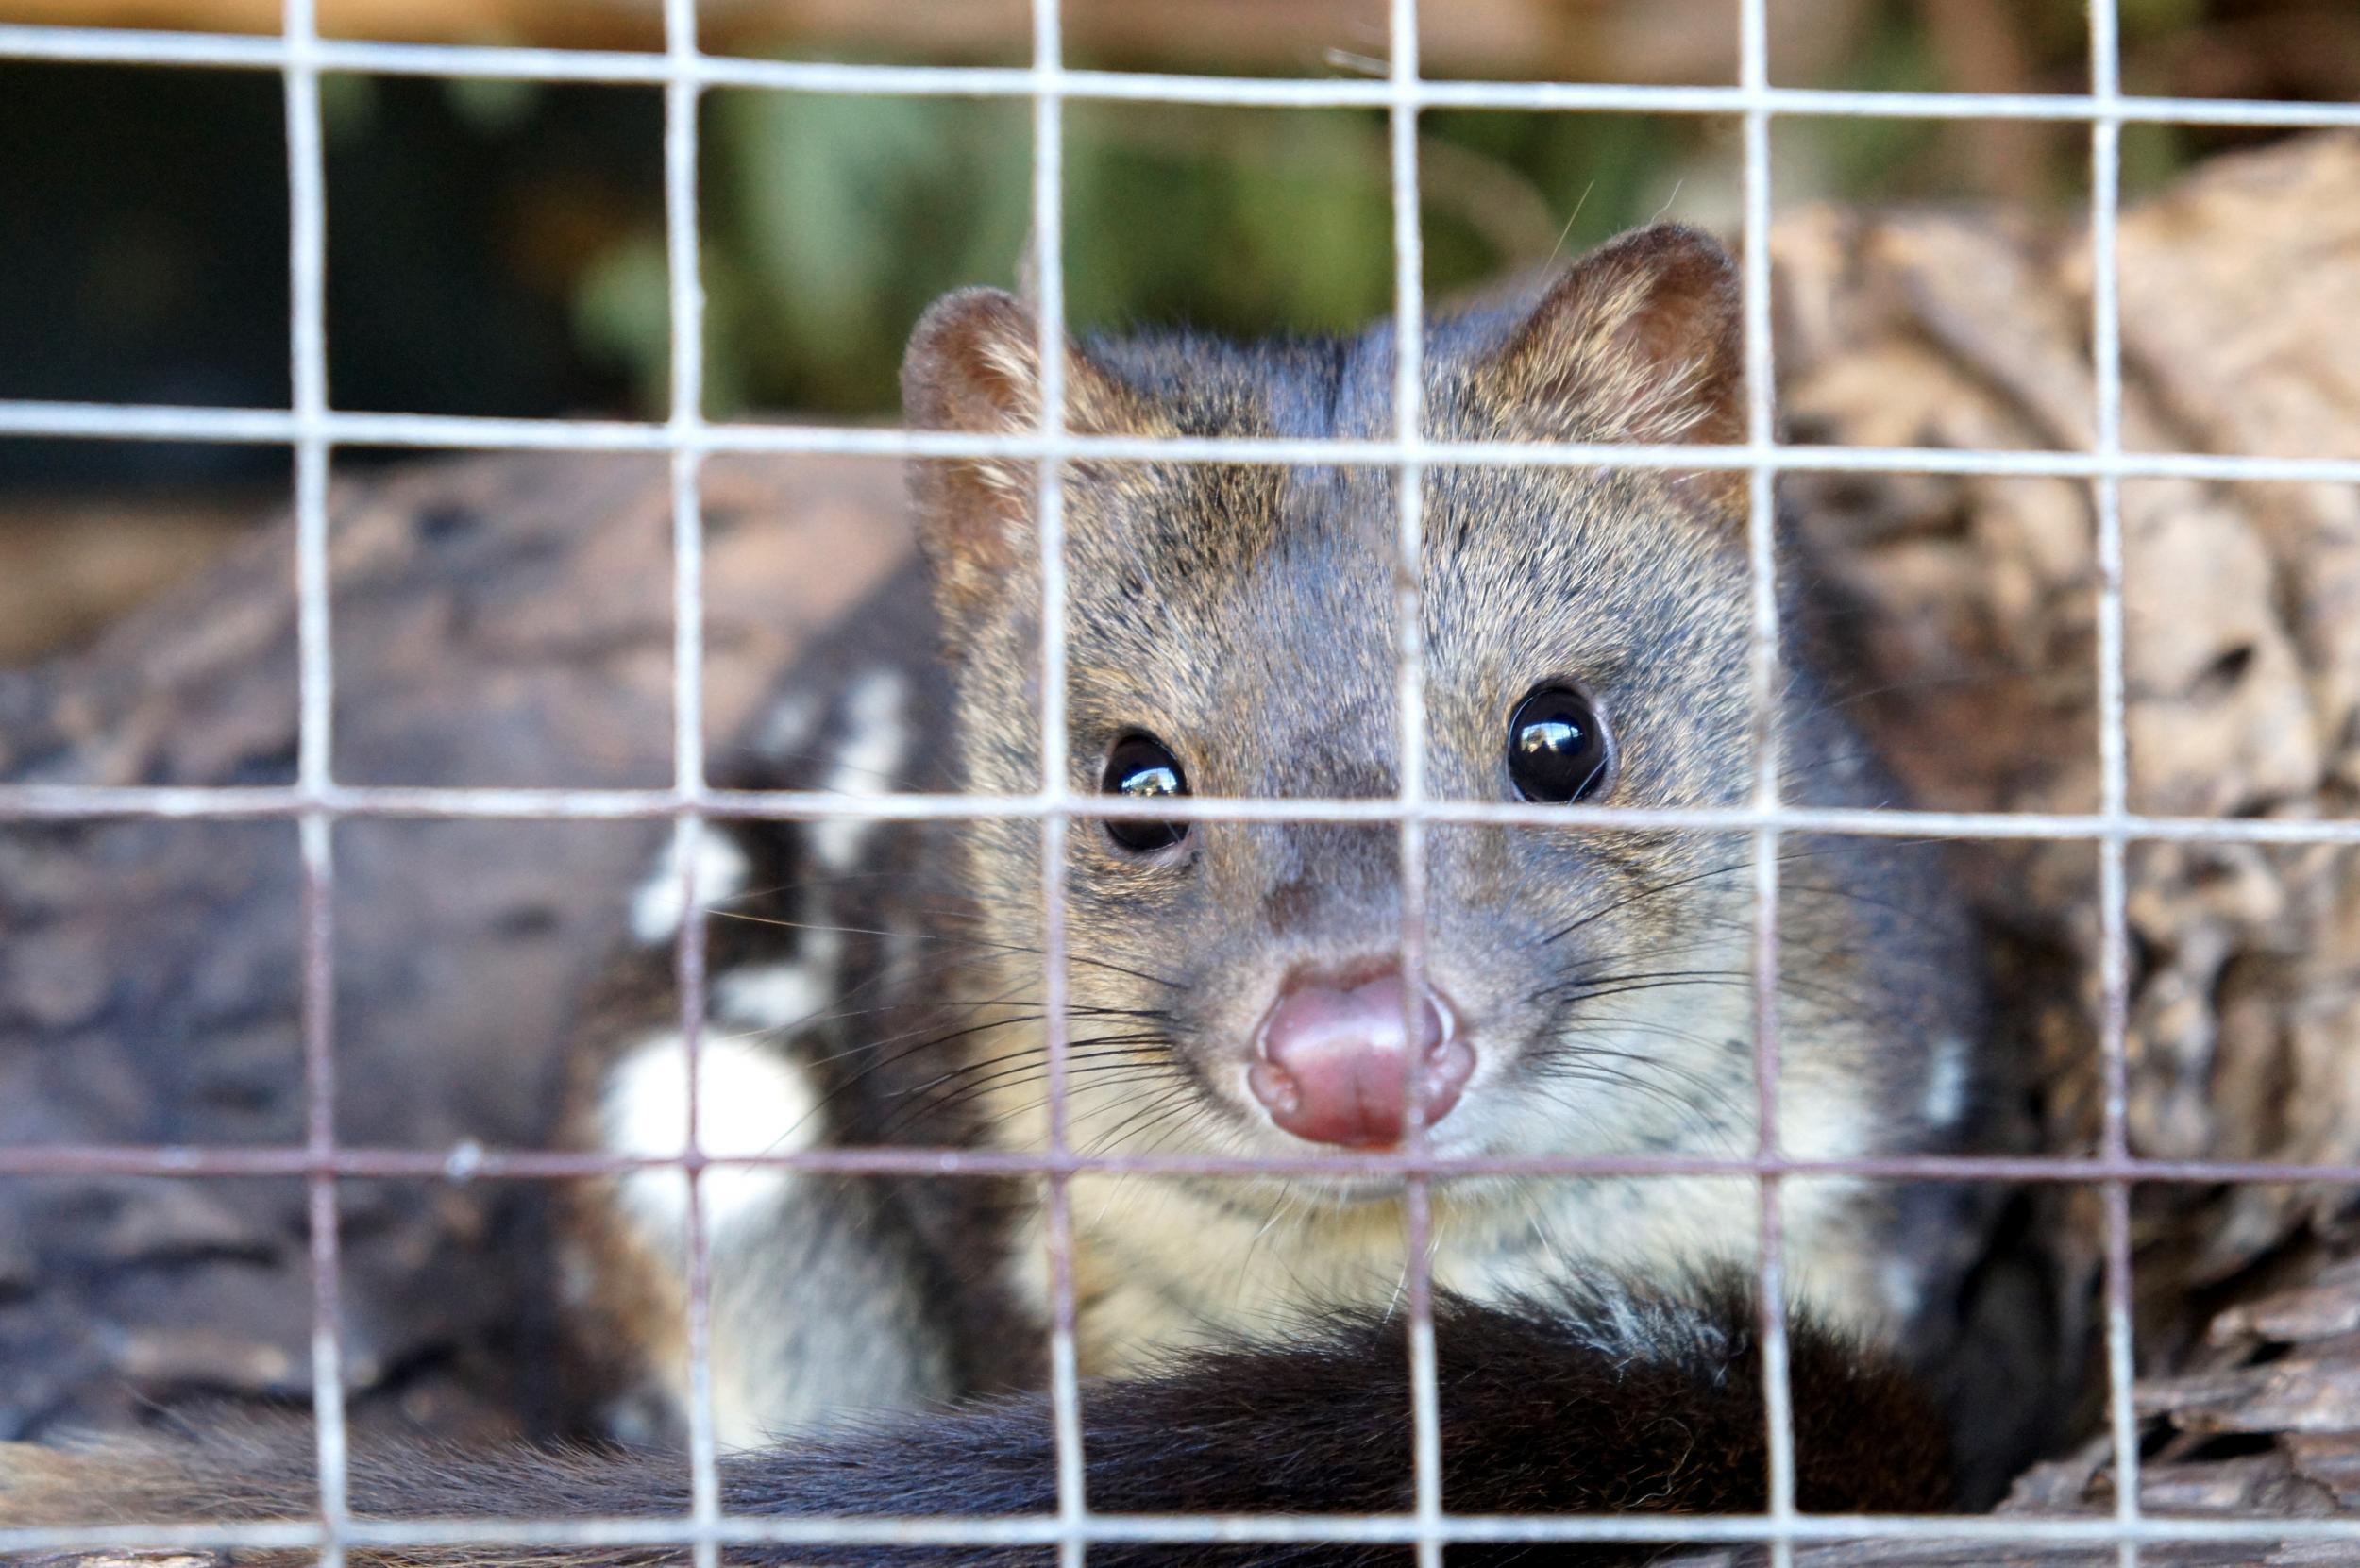 The chudditch, or Western Quoll, is a native marsupial that will be reintroduced to the island